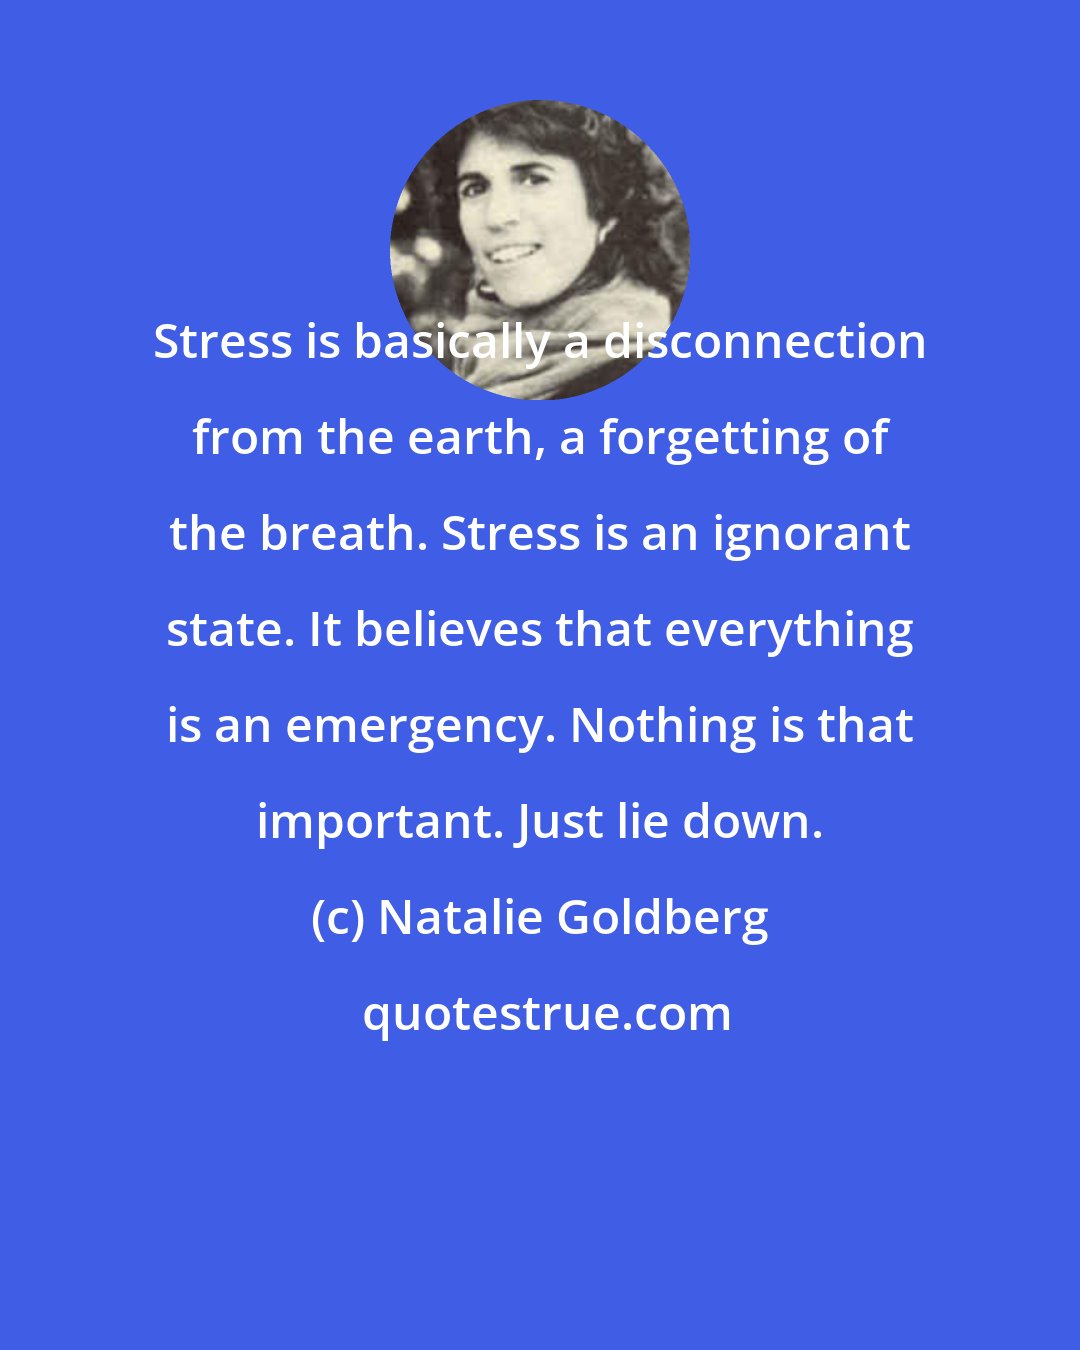 Natalie Goldberg: Stress is basically a disconnection from the earth, a forgetting of the breath. Stress is an ignorant state. It believes that everything is an emergency. Nothing is that important. Just lie down.